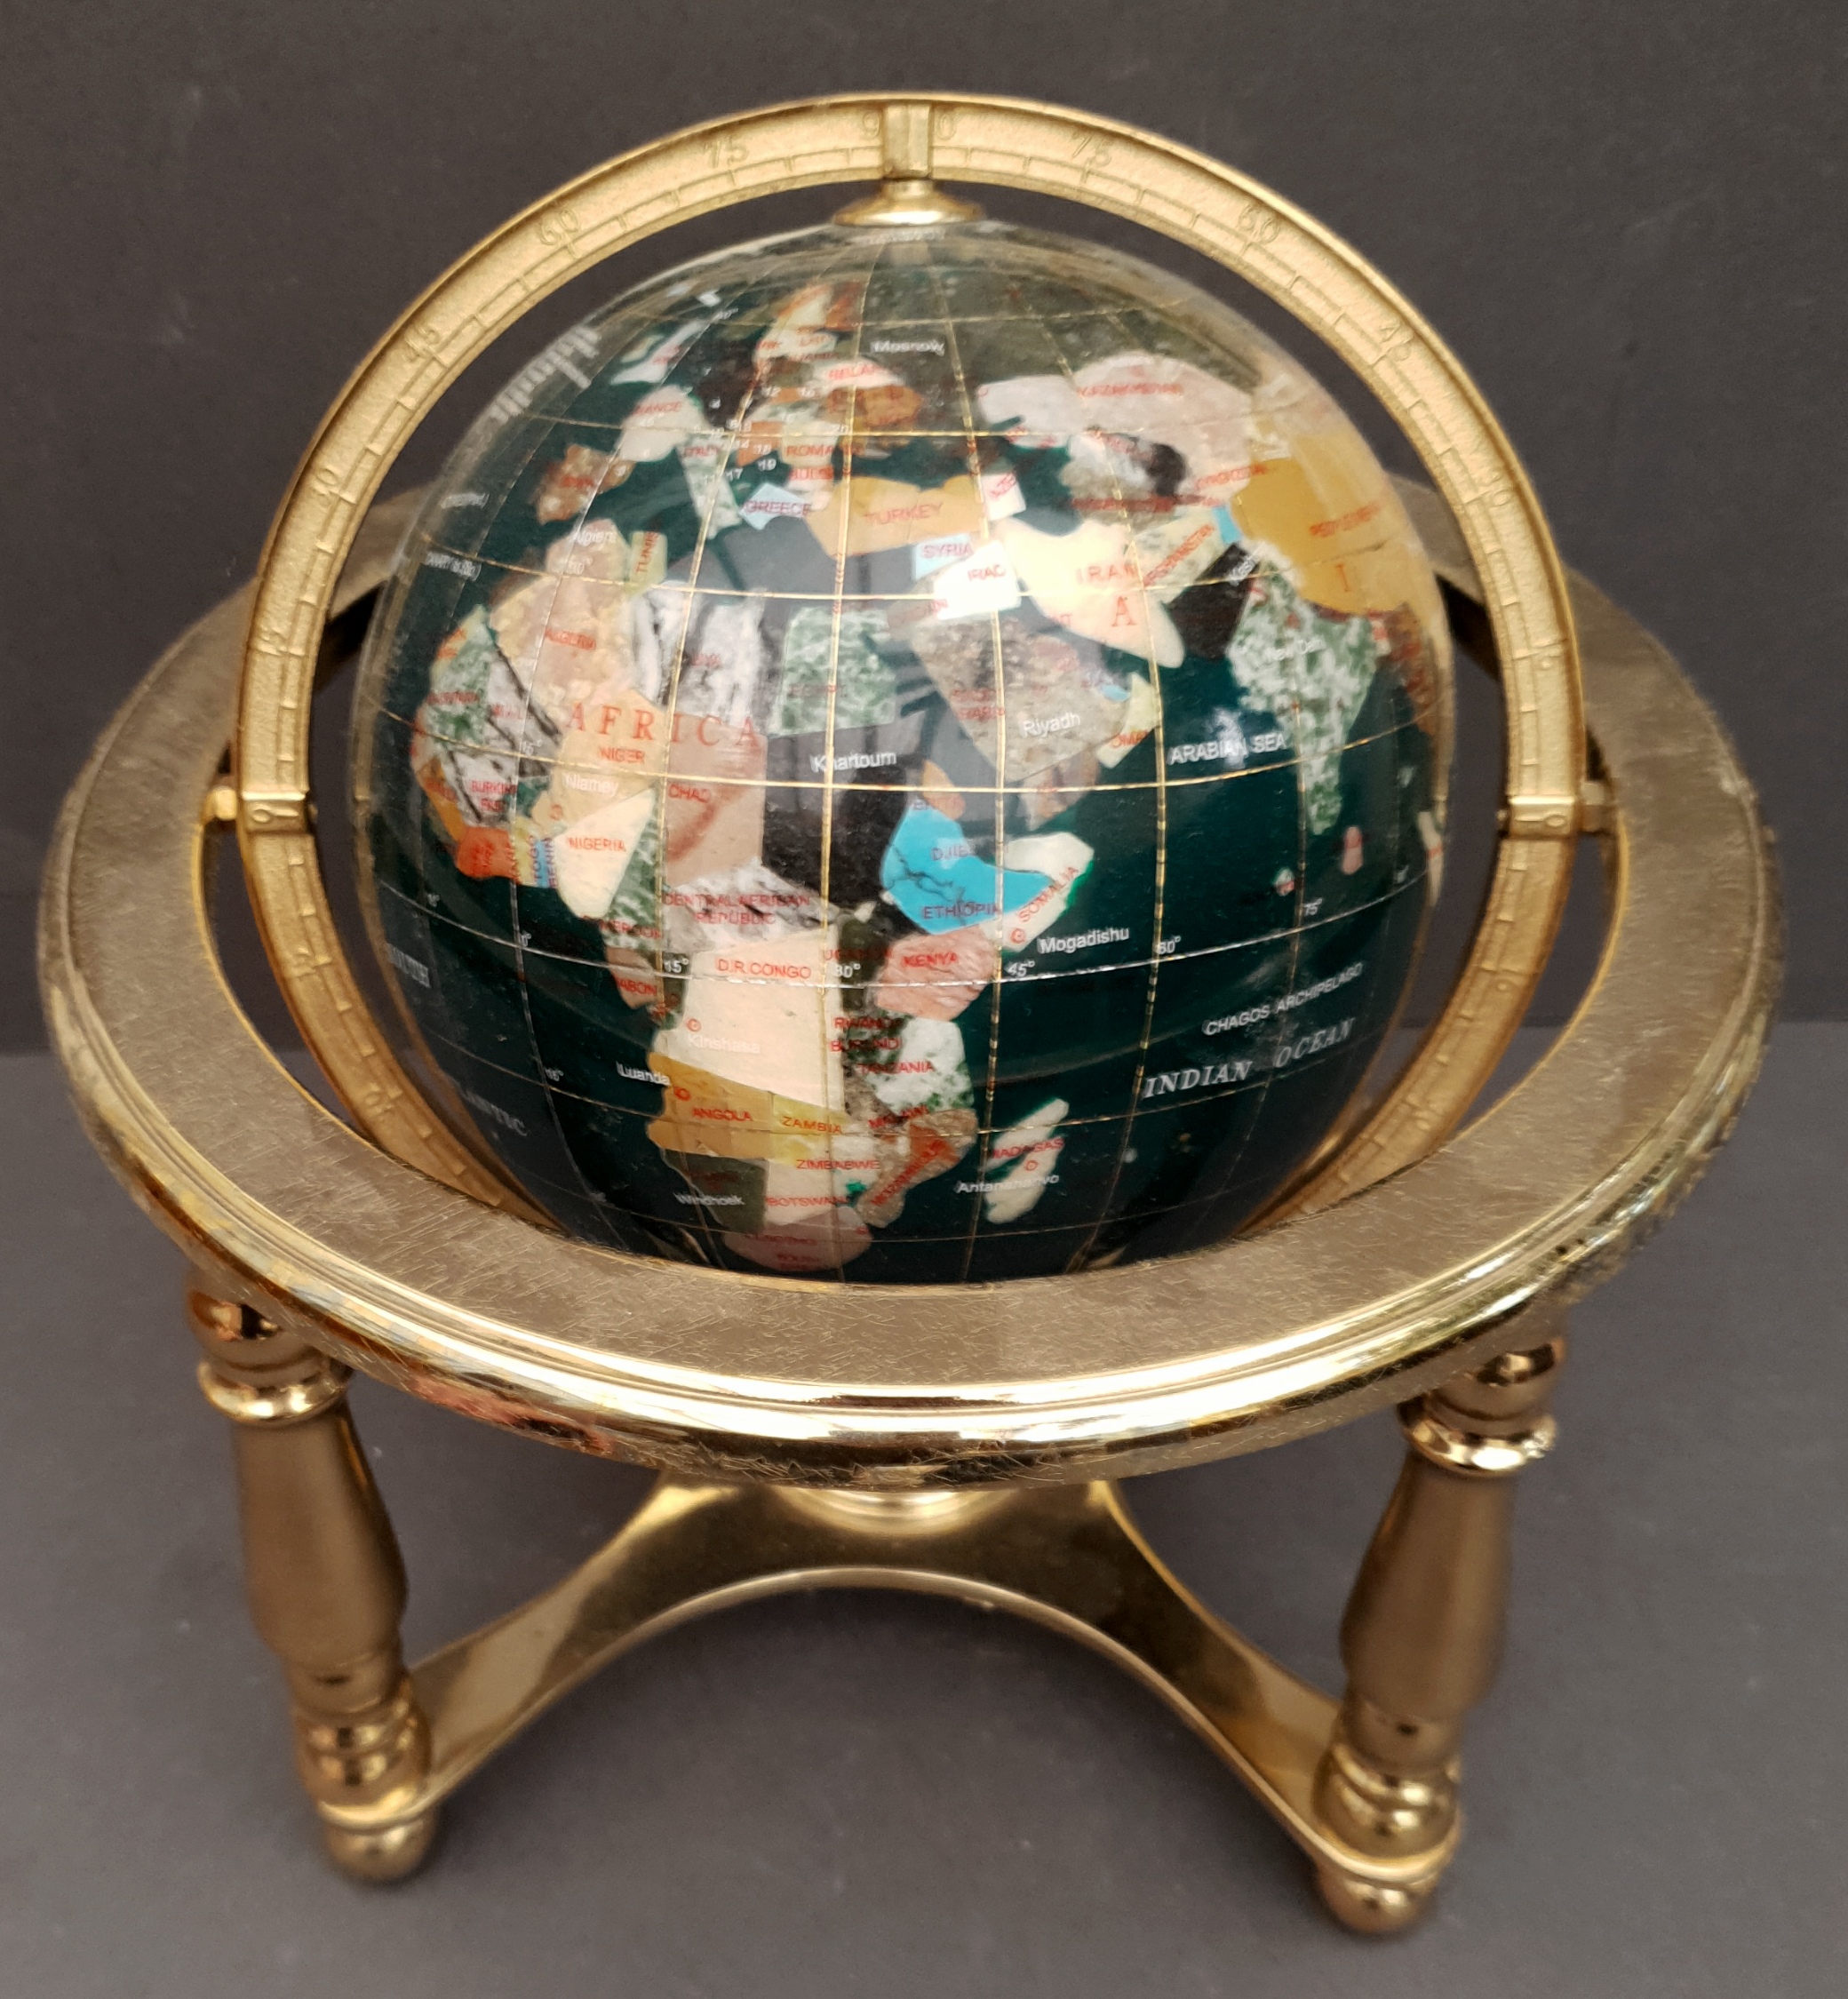 Vintage Brass and Agate Decorative Globe on a Green Ground. Measures 9 inches diameter. Part of a